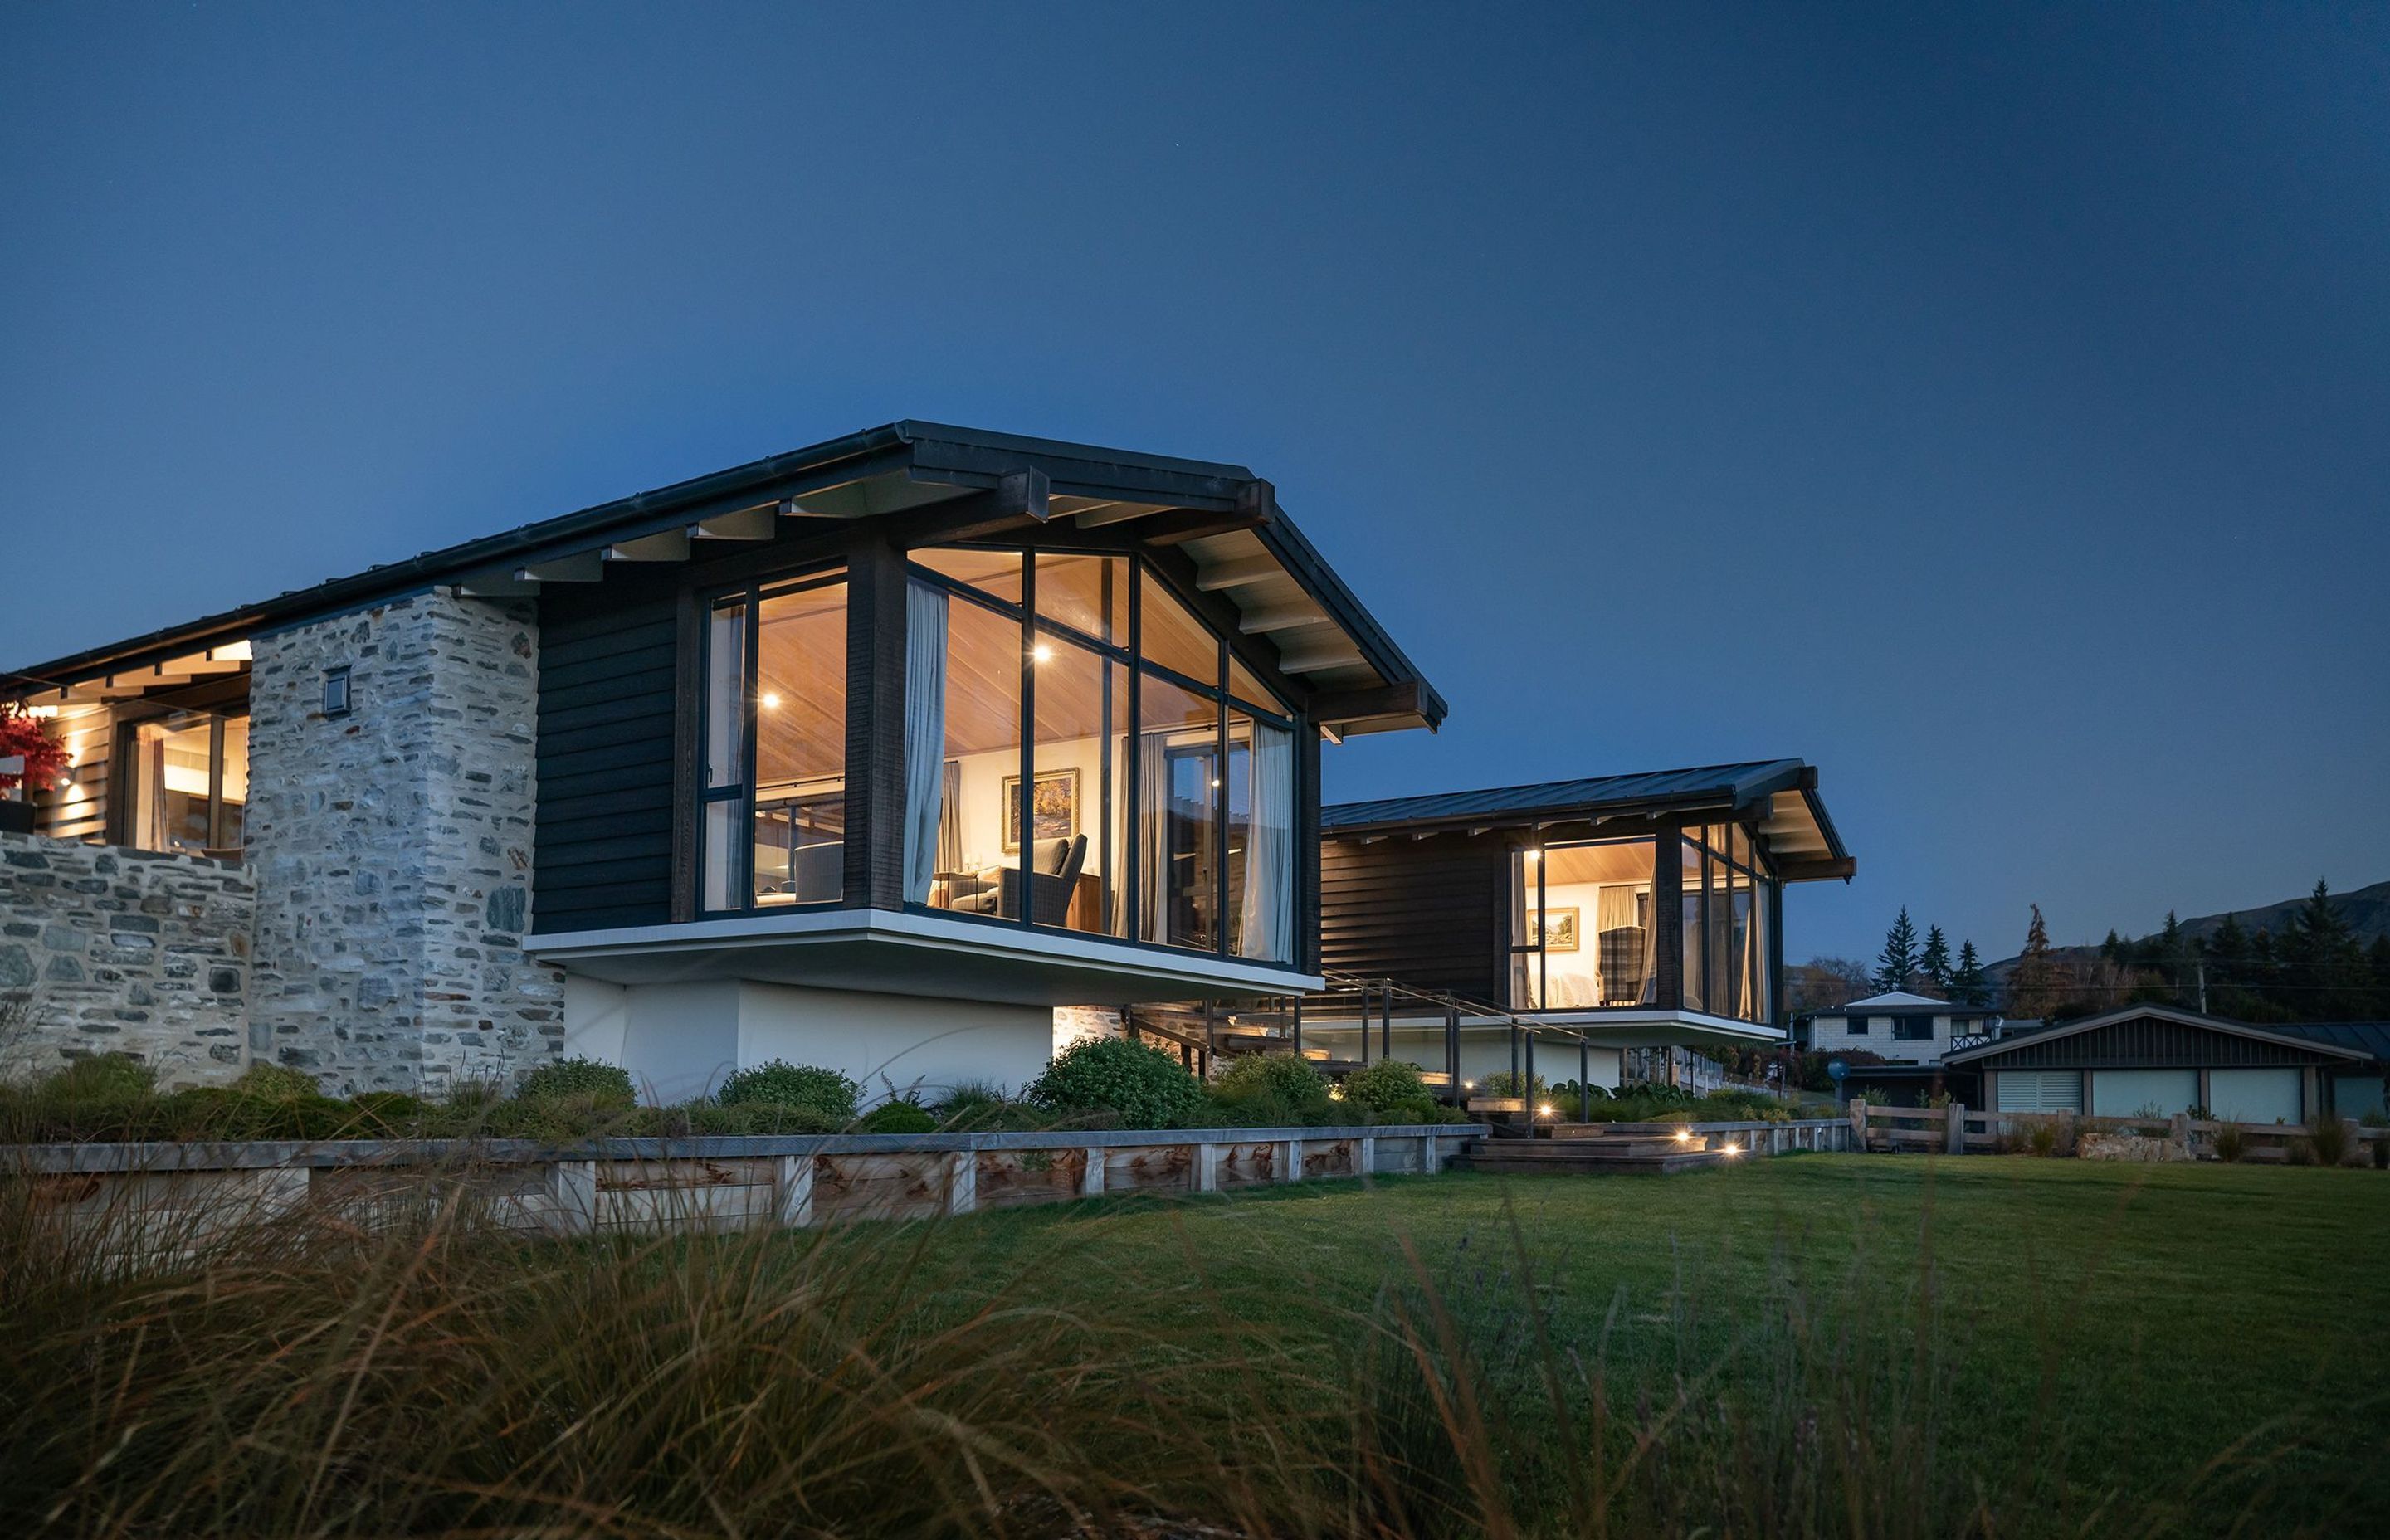 The cantilevered floor element extends the home into the environment, bringing the lake view very much to the fore.